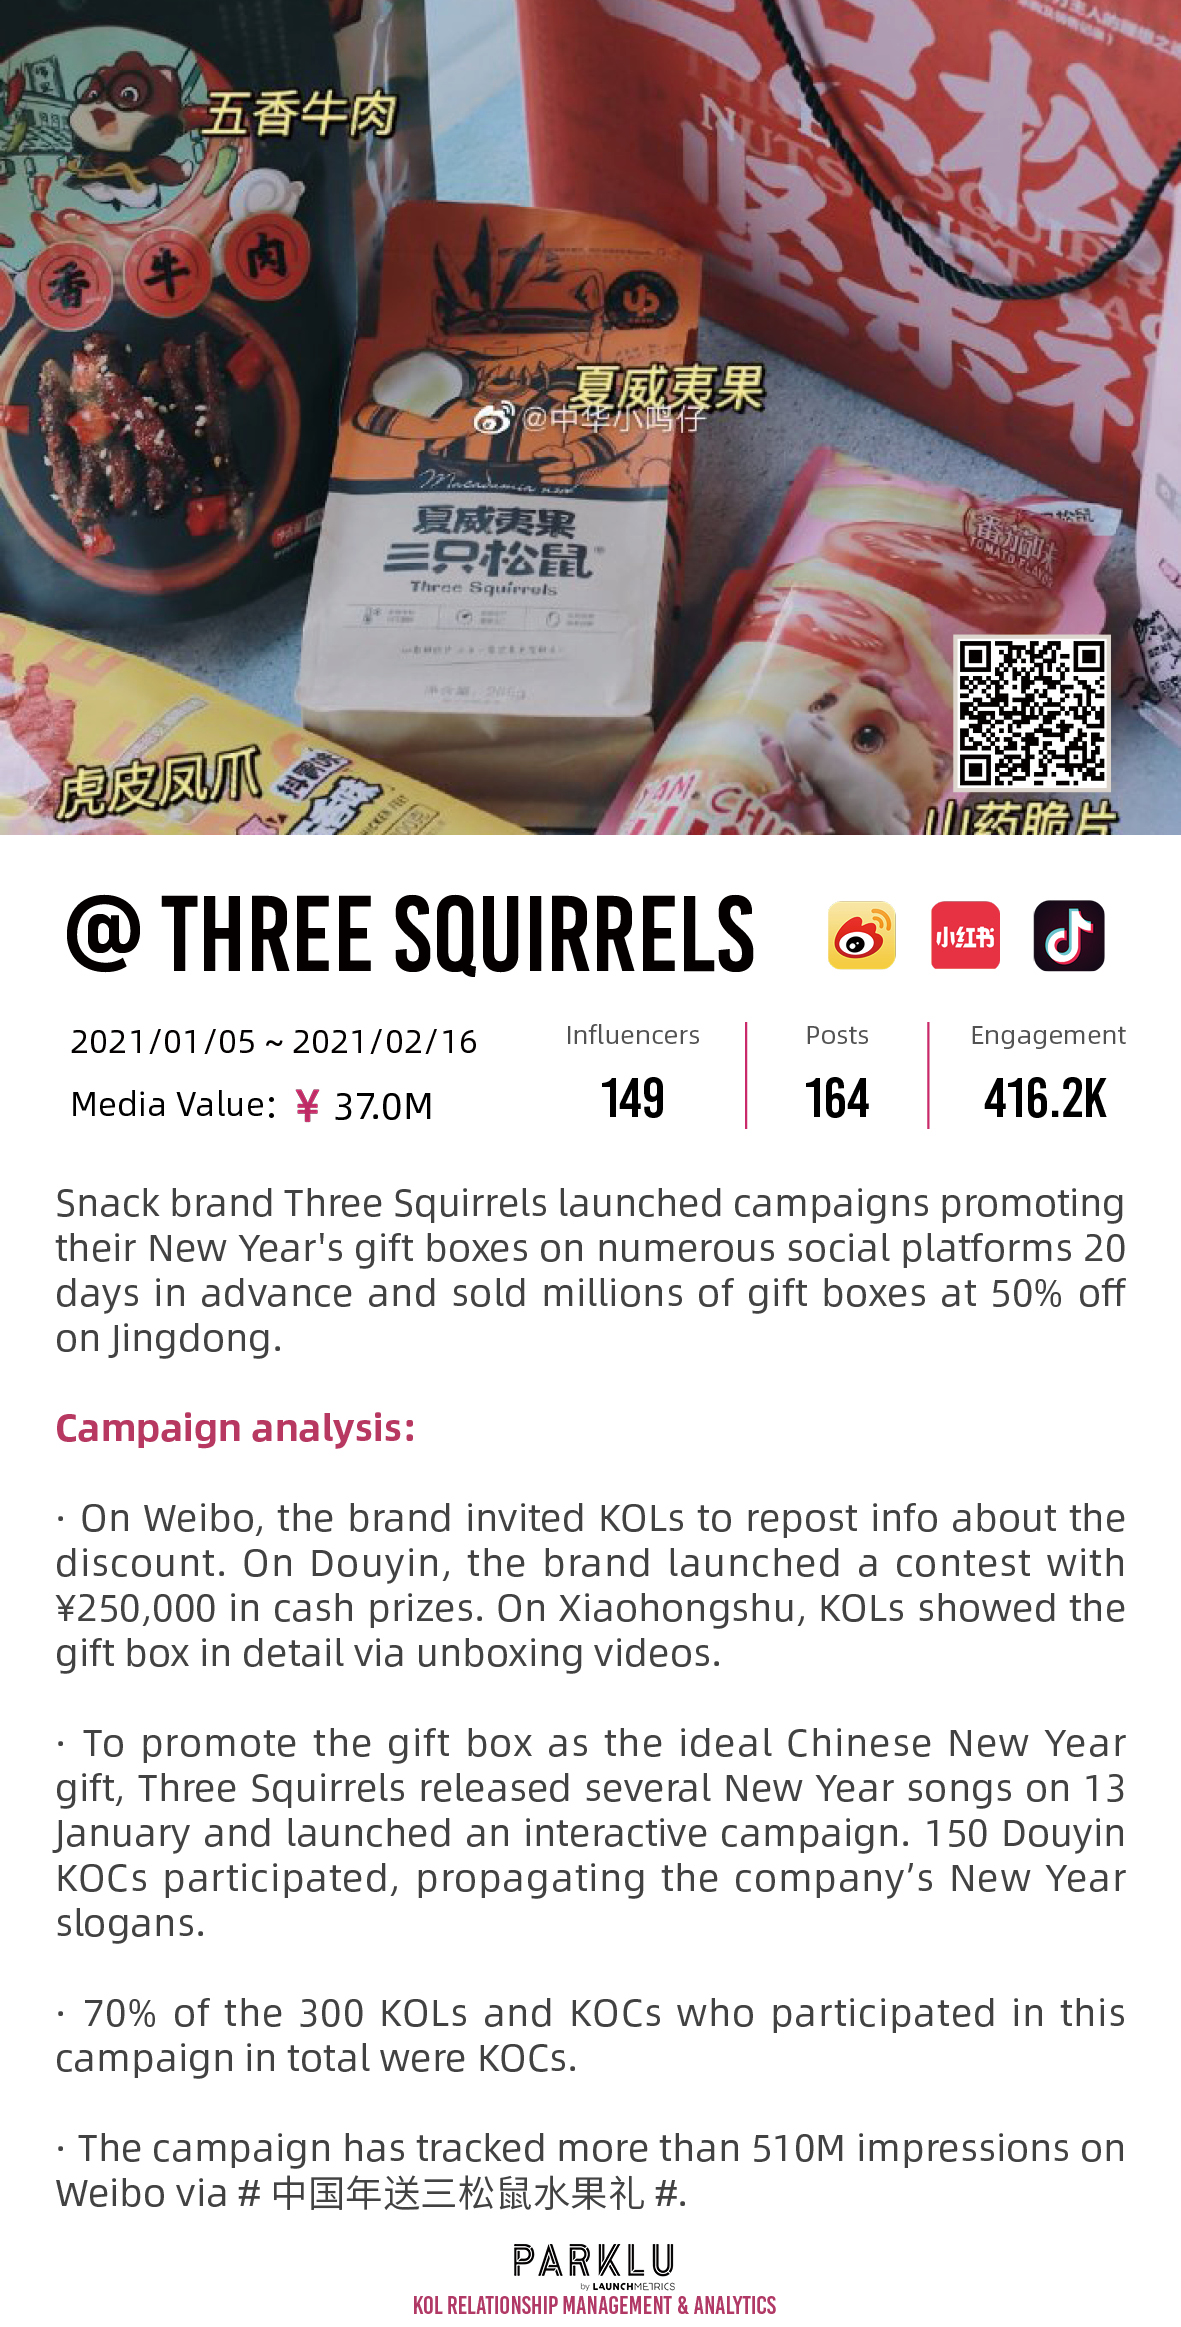 Three Squirrels New Year's Gift Boxes